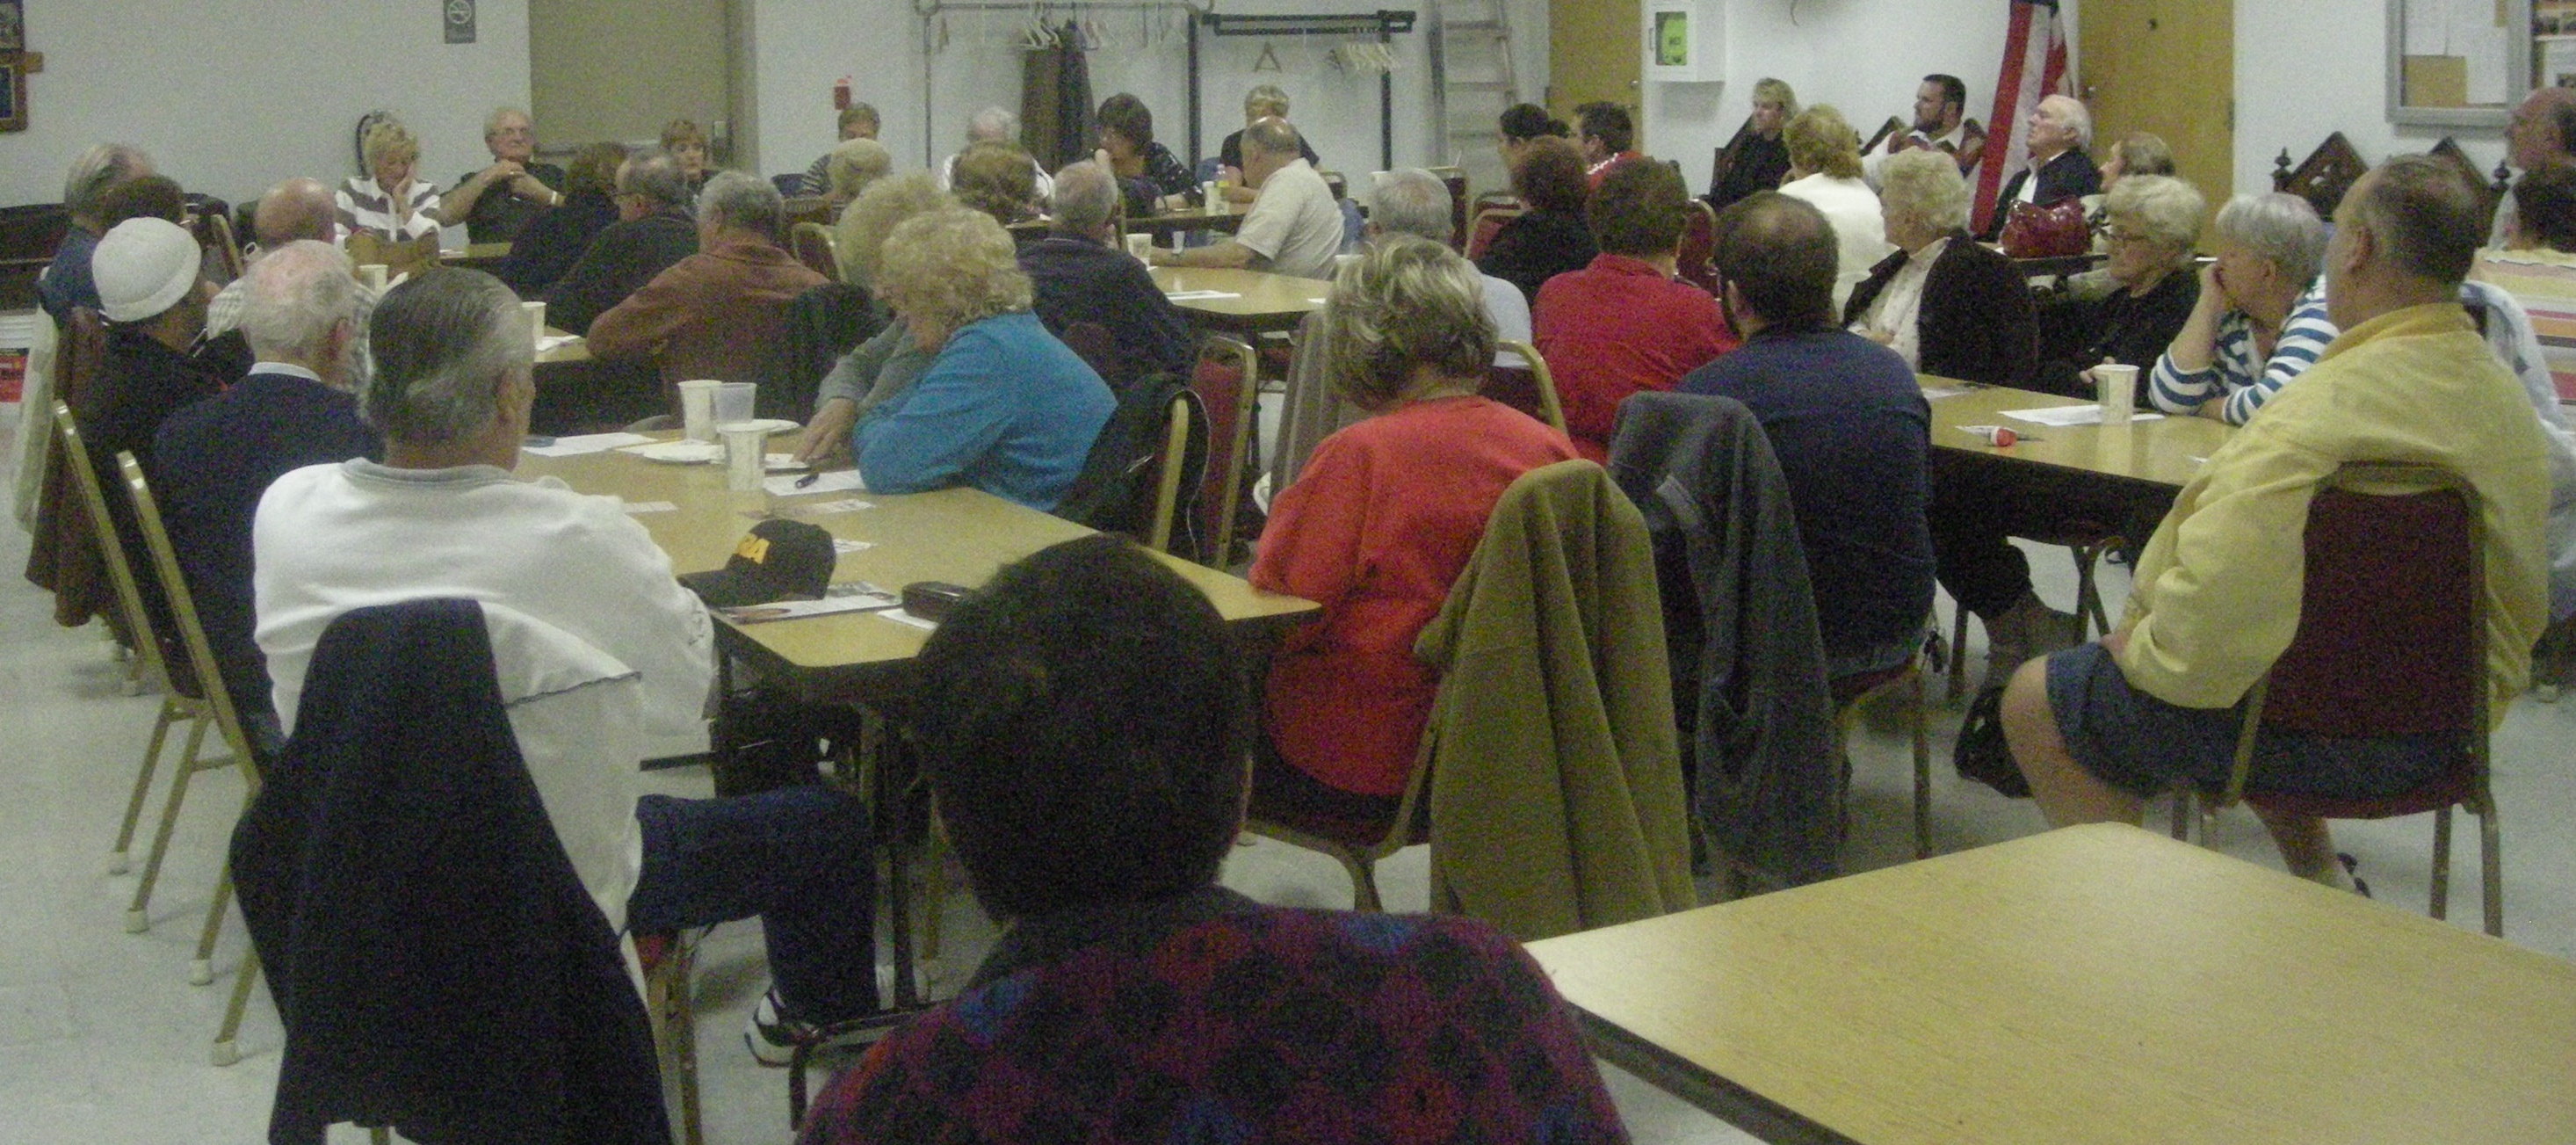 Somerton Civic Association board members present last month's minutes to the attendees.